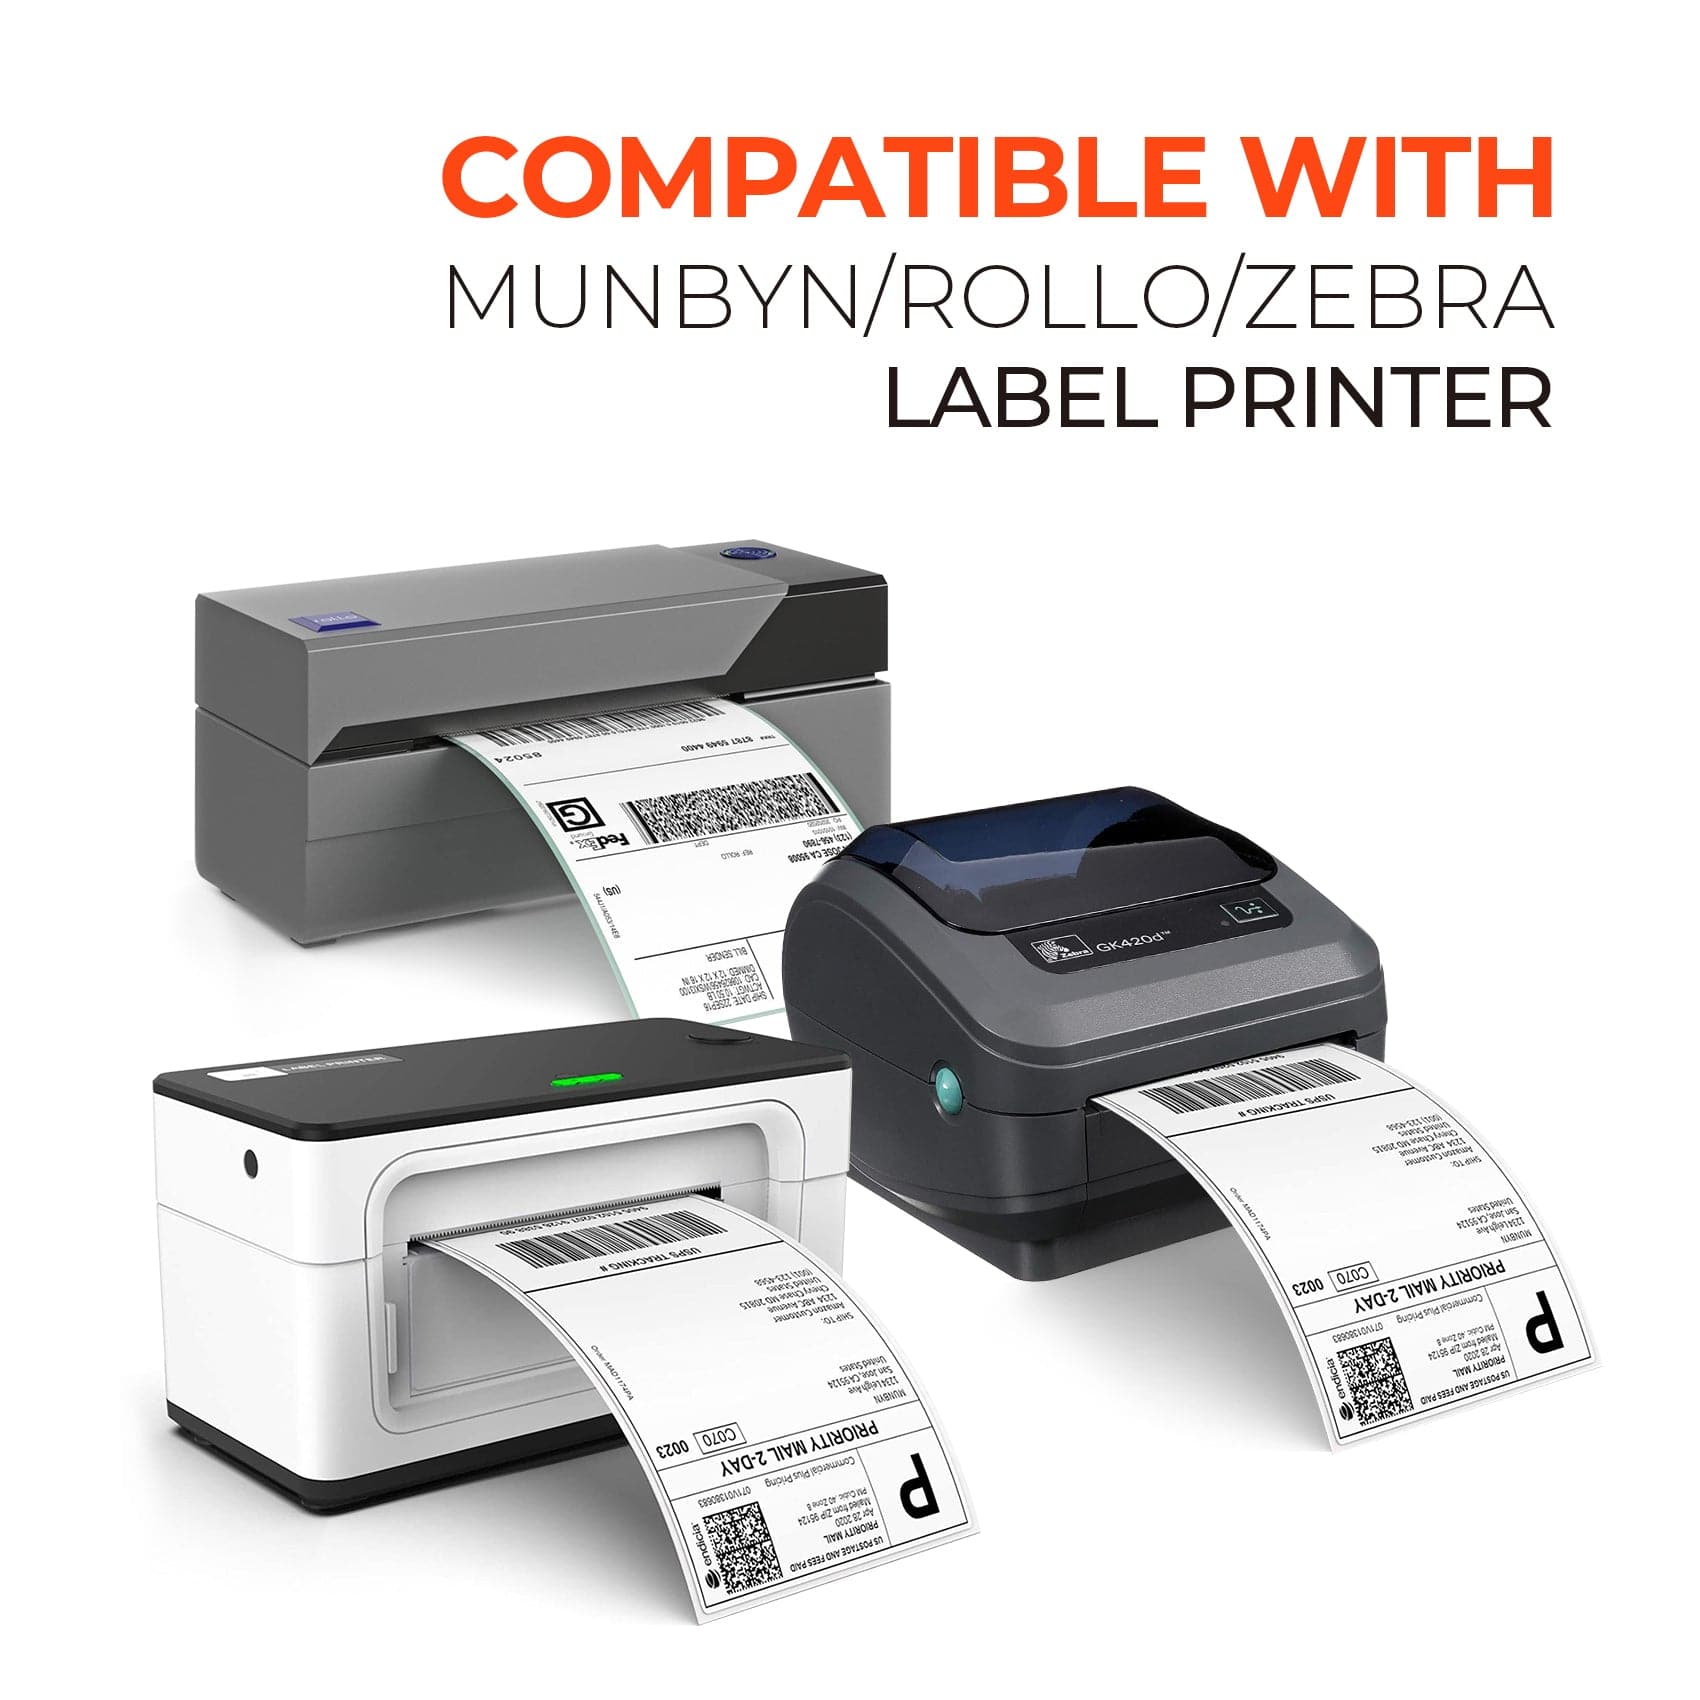 MUNBYN 4x6 shipping labels are compatible with a wide range of label printers, such as MUNBYN, ROLLO, and ZEBRA.